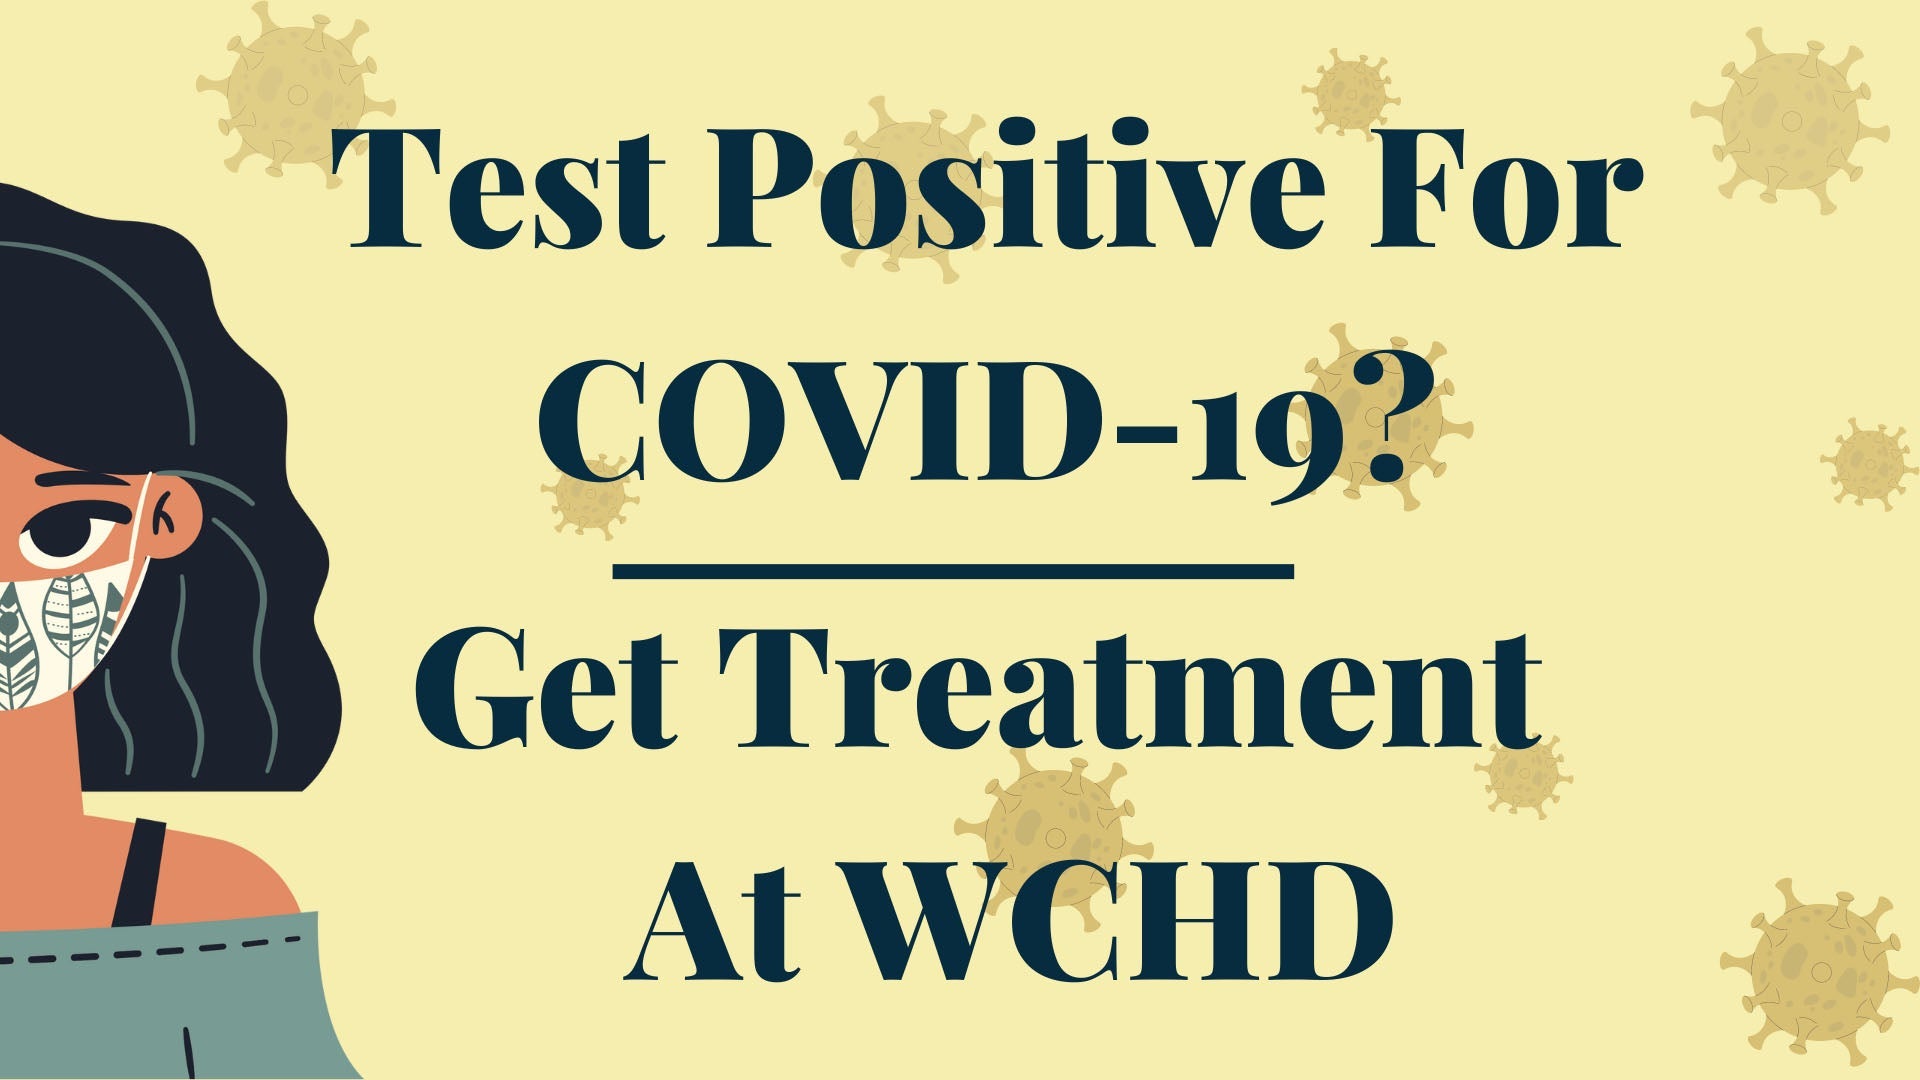 treatment for covid-19 - get treatment at WCHD